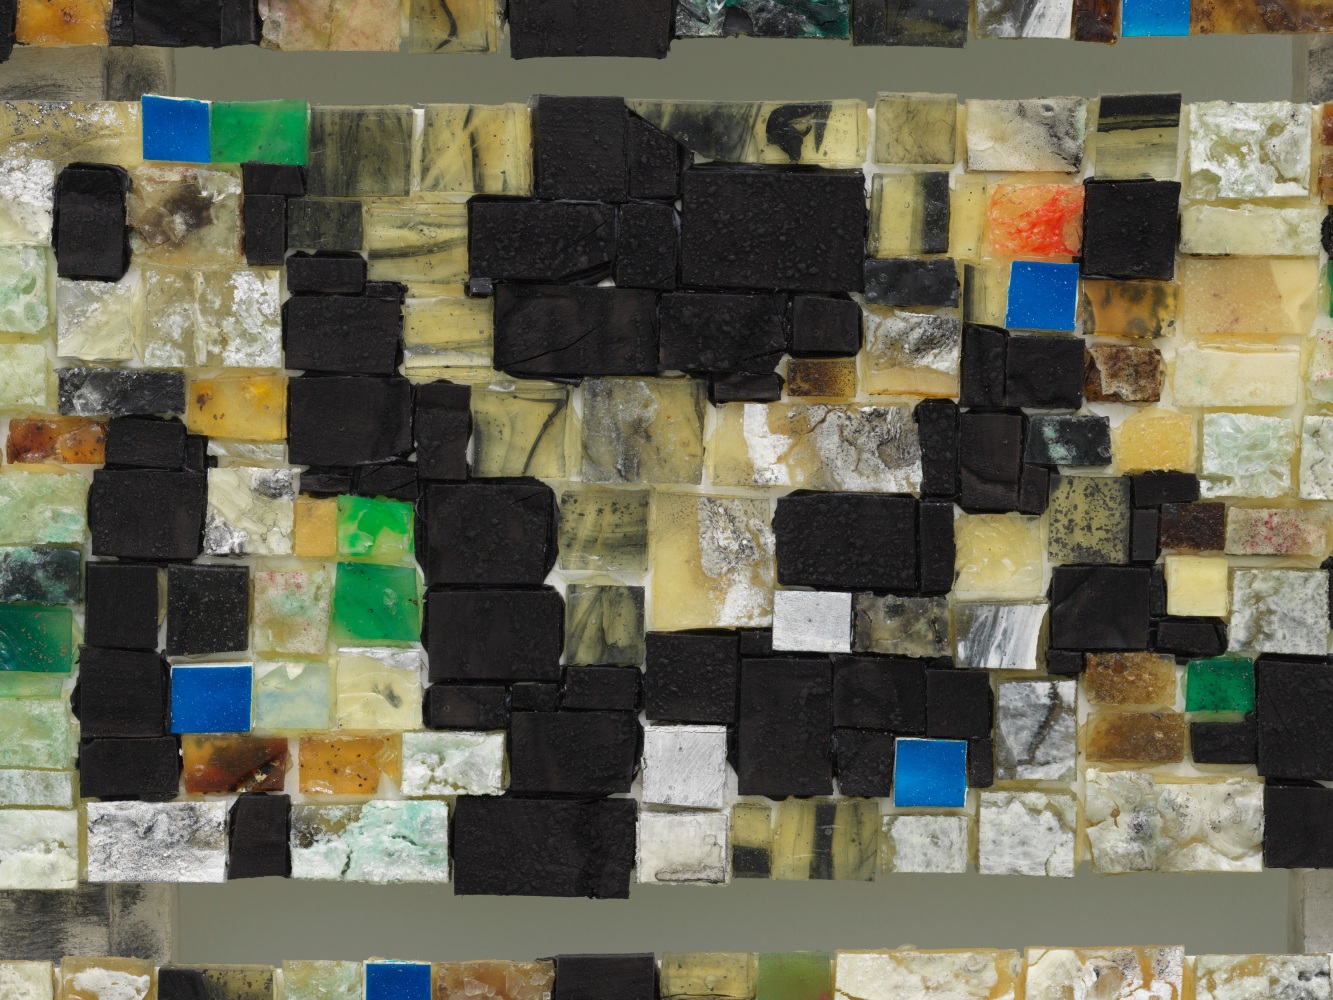 Jack Whitten
Totem 2000 V: For KD (Kenny&amp;#39;s Ladder), 2000 (detail)
Acrylic on plywood&amp;nbsp;
89 1/4 x 21 1/4 x 1 3/4 inches
(226.7 x 54 x 4.4 cm)
&amp;copy; Jack Whitten Estate. Courtesy the Estate, Hauser &amp;amp; Wirth, and Luhring Augustine, New York. Photo: Dan Bradica.